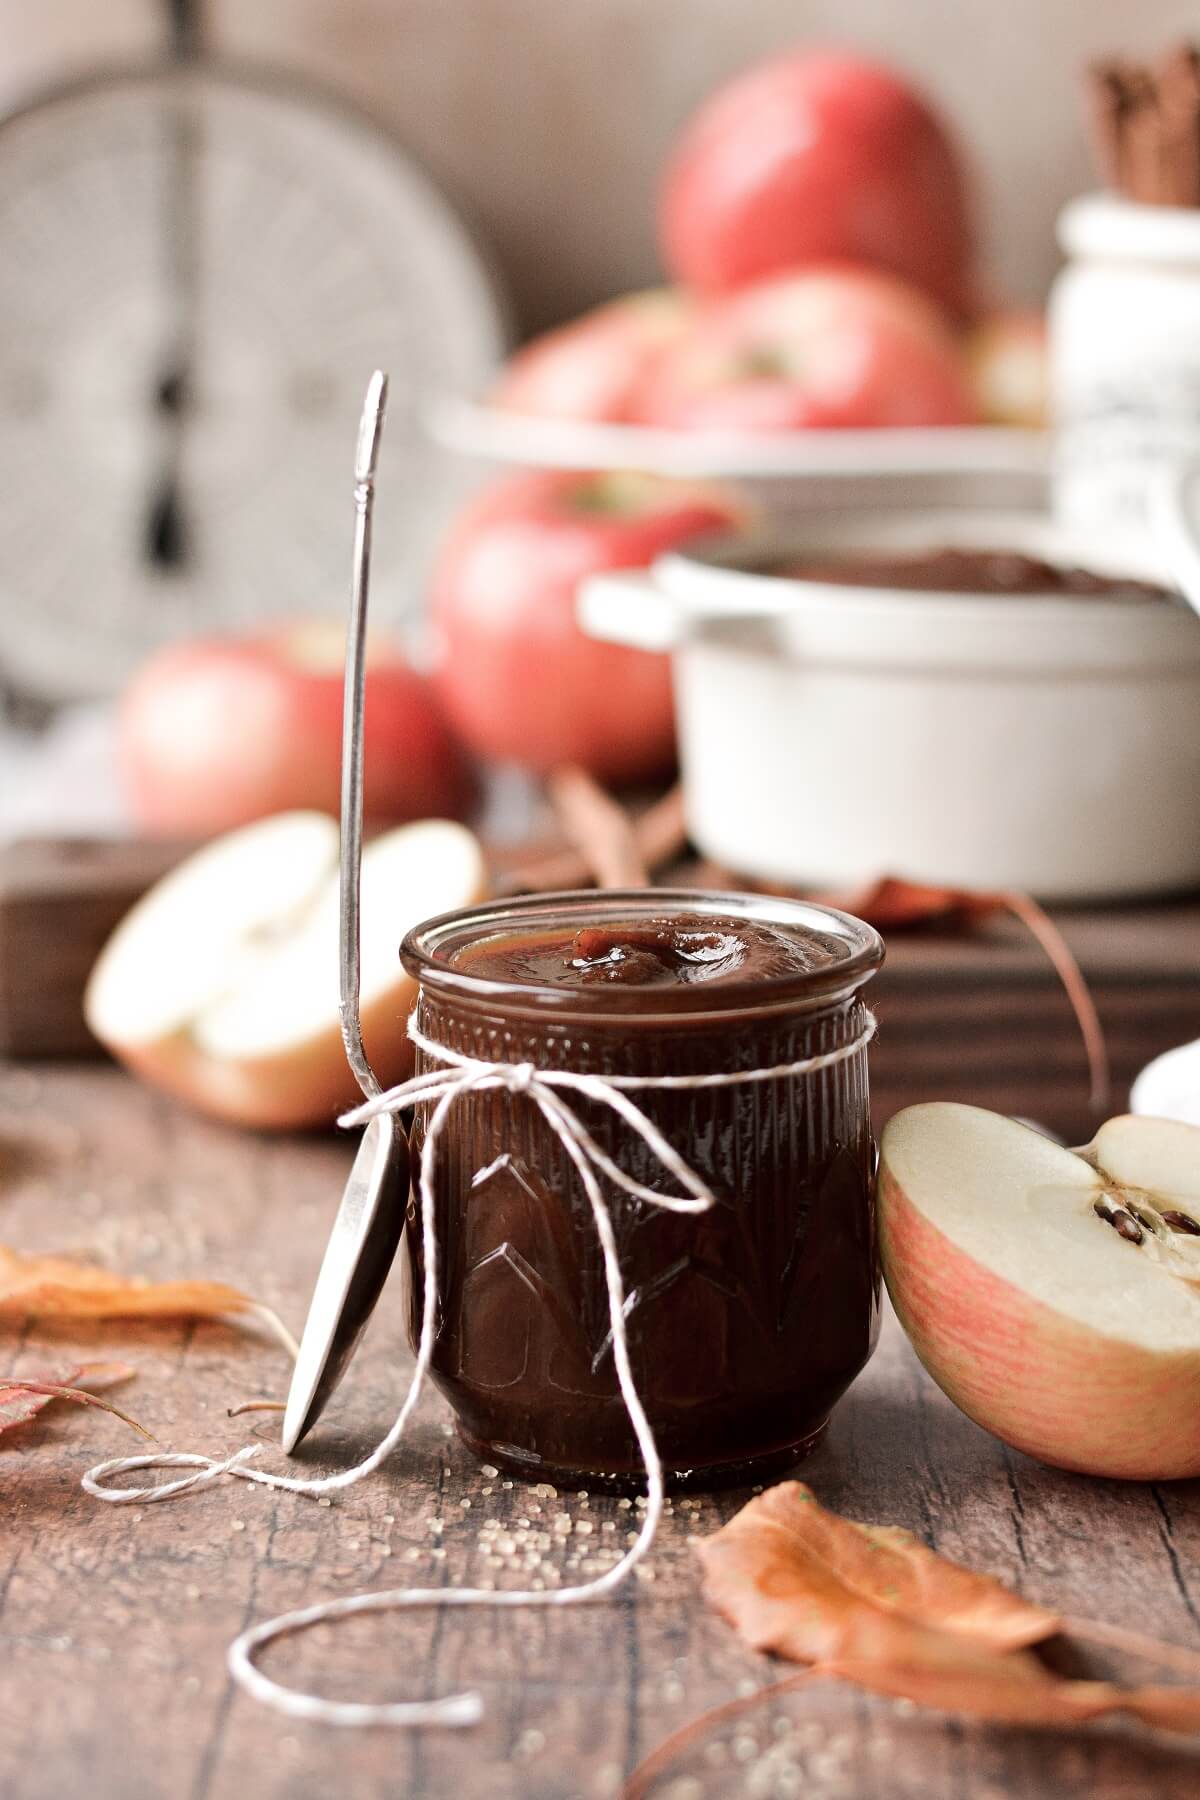 Apple butter in a glass jar, sourrounded by apples and leaves.